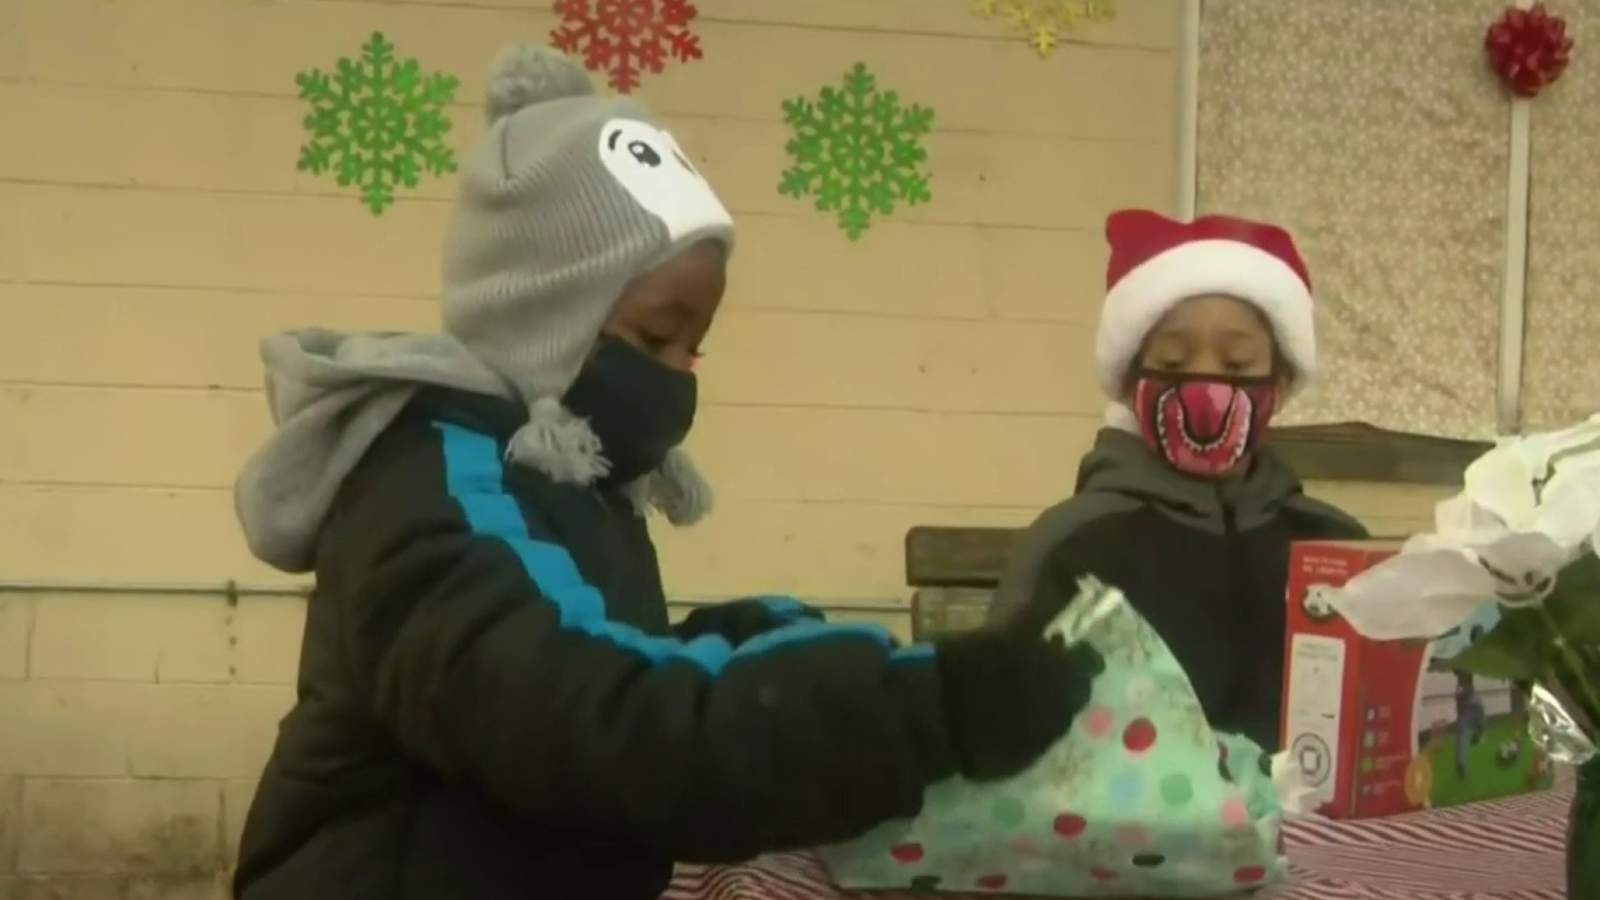 Detroit Rescue Mission surprised with donations of toys for children, upgraded WiFi for remote learning